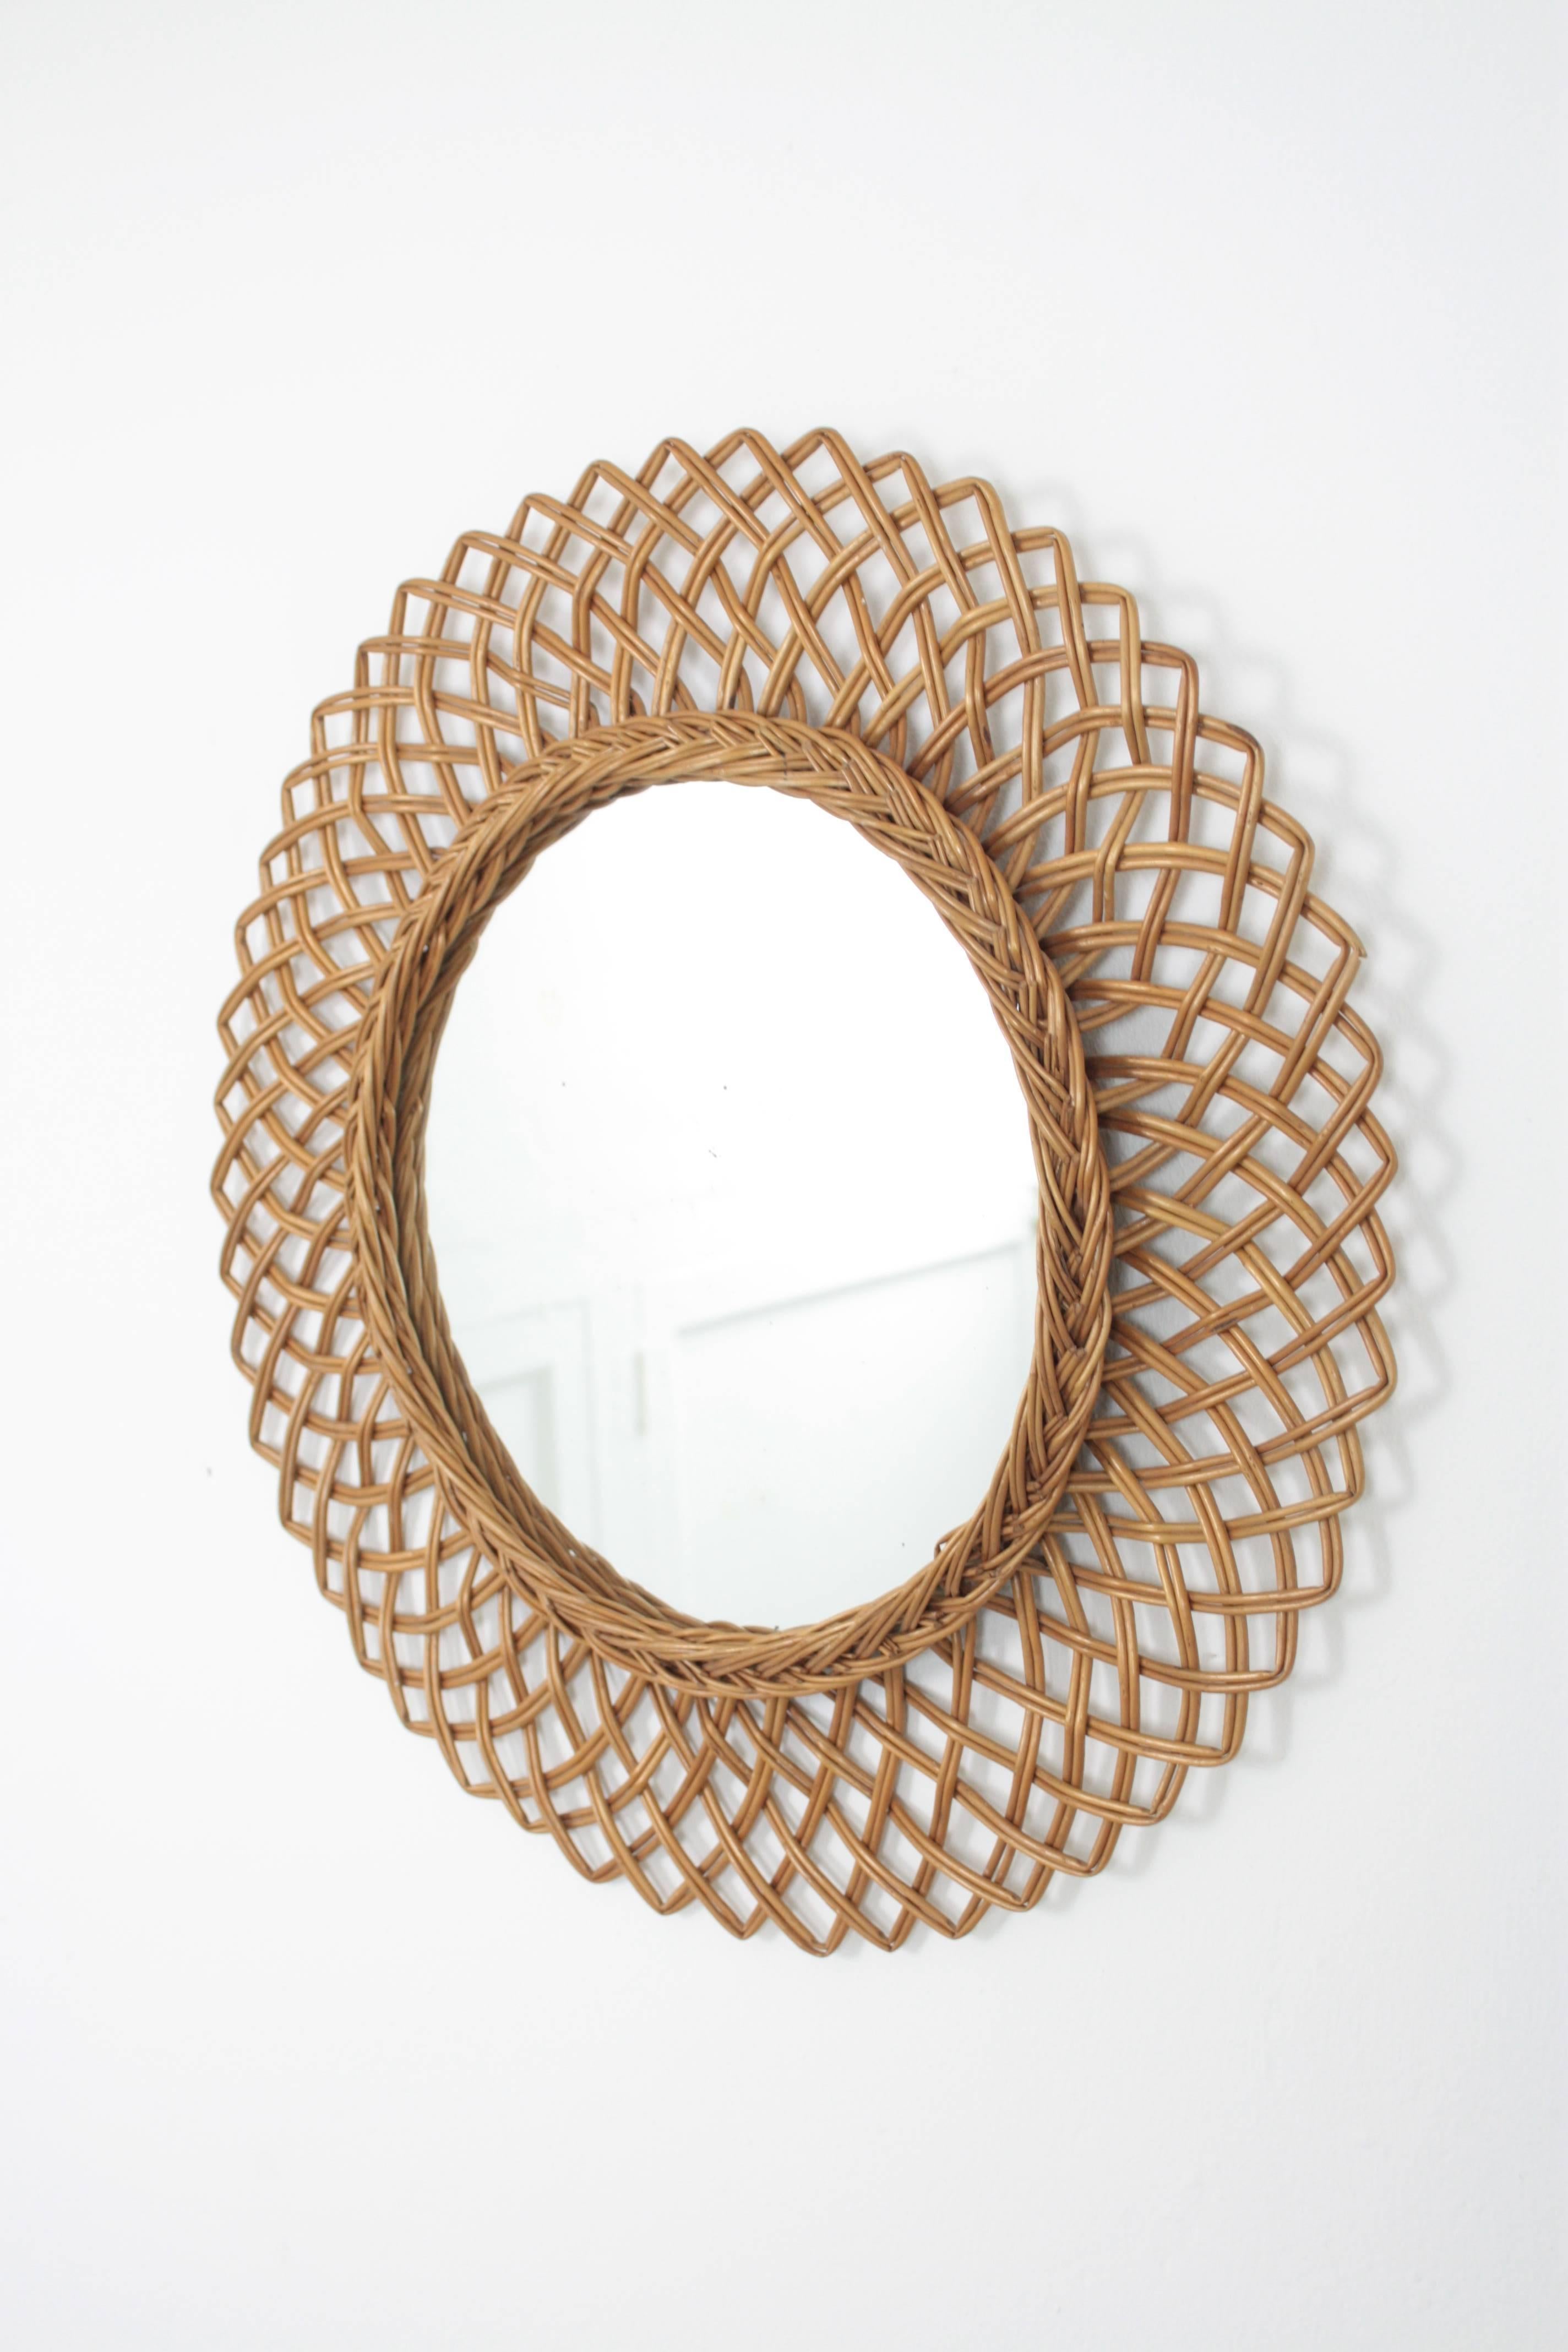 Lovely handcrafted rattan mirror with highly decorative hand-braided frame.
Beautiful to create a wall decoration with other mirrors in this manner or to place it alone. 
Amazing Mediterranean style taste.
Spain, 1960s.
Measures: 50 cm diameter //